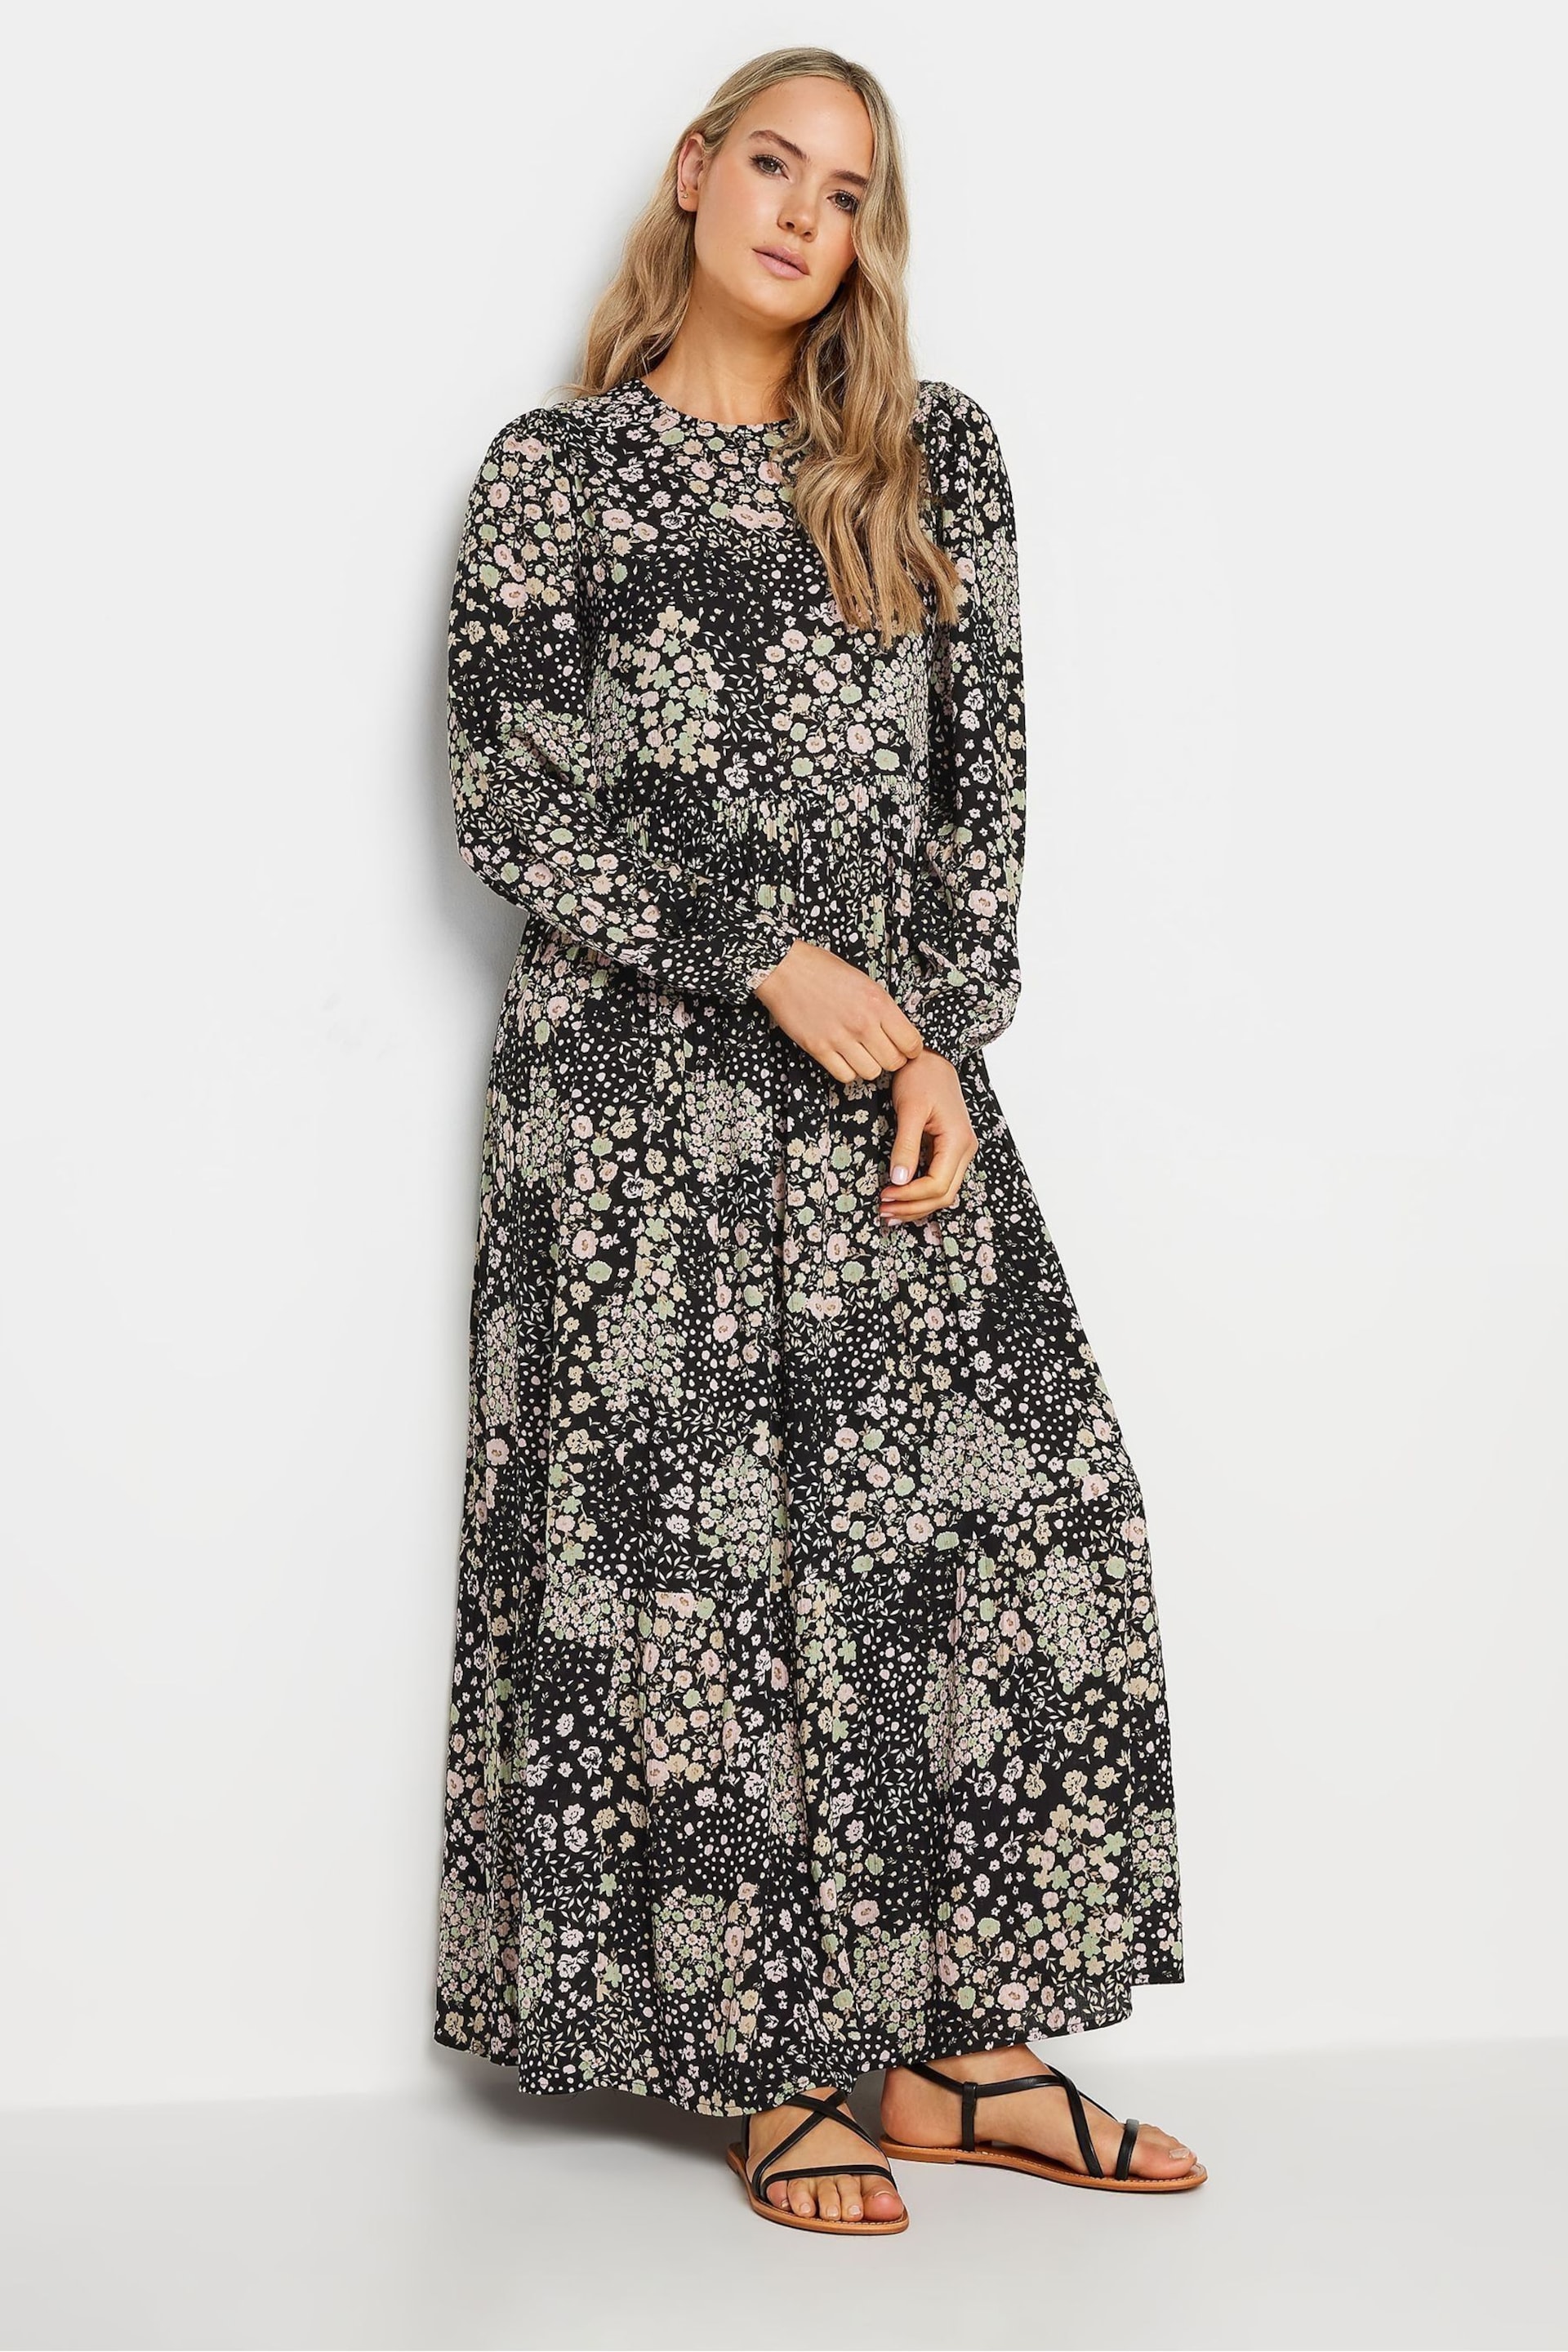 Long Tall Sally Black Floral Print Tiered Maxi Dress - Image 1 of 5